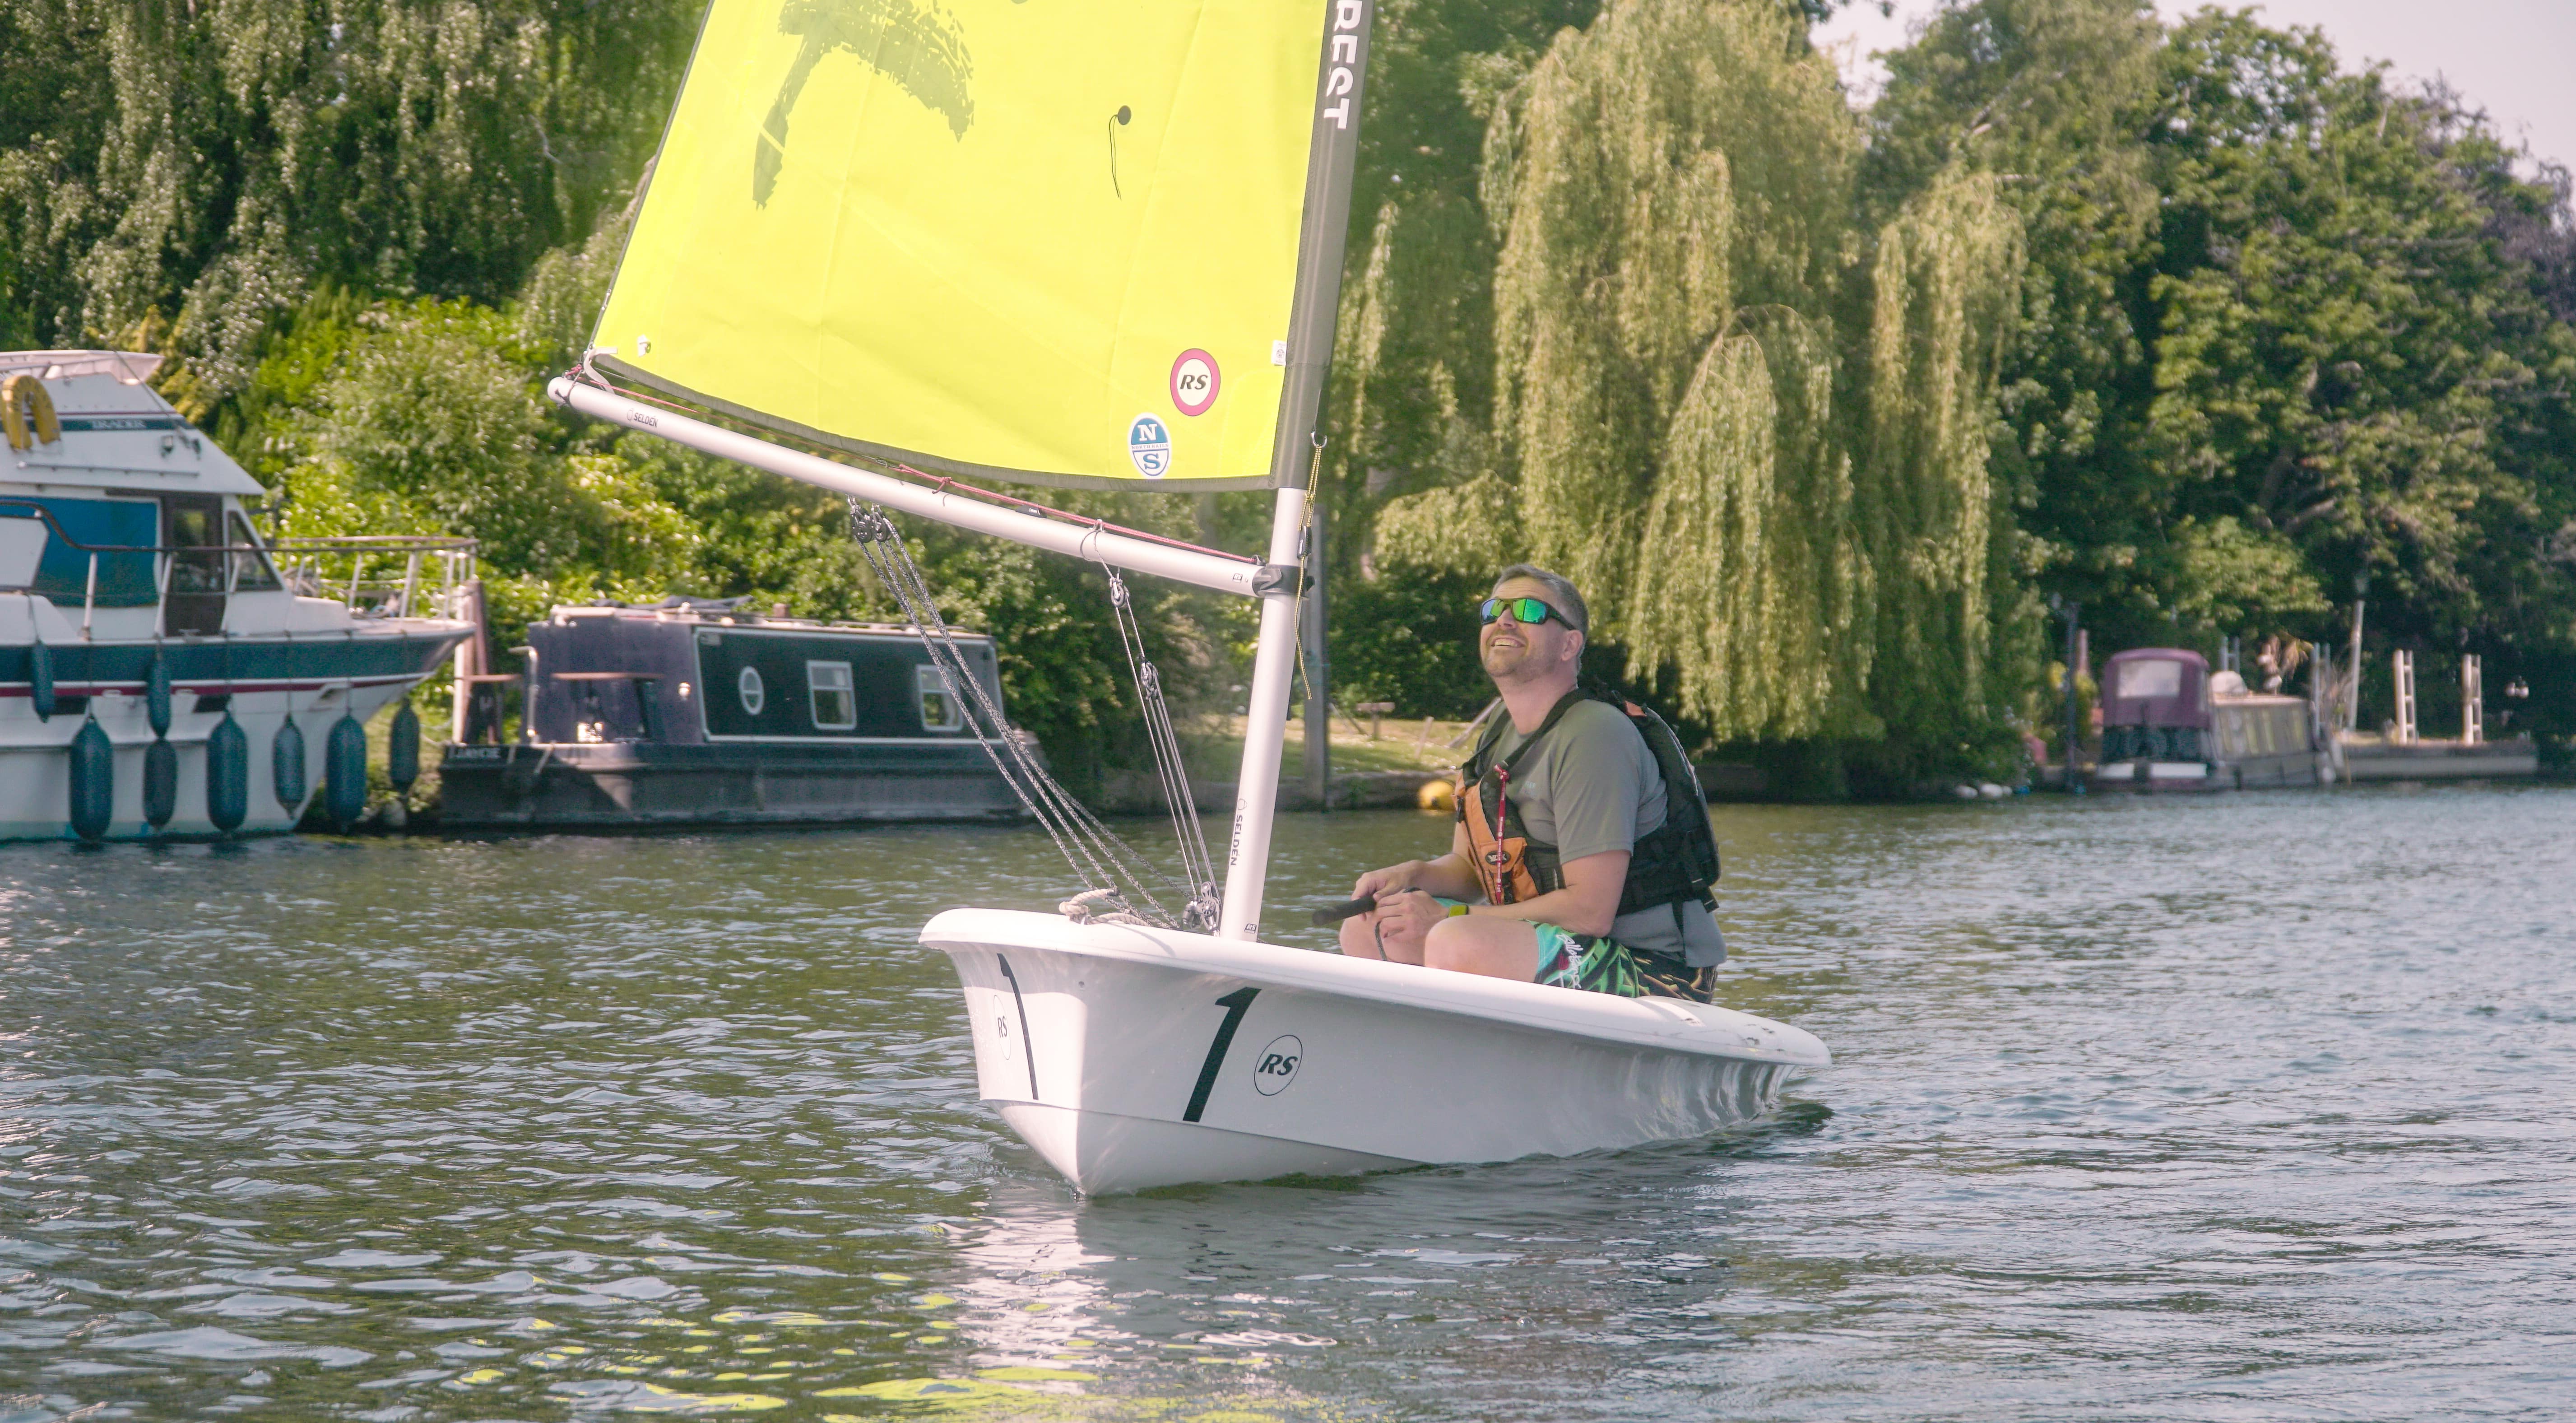 sailing on the River Thames